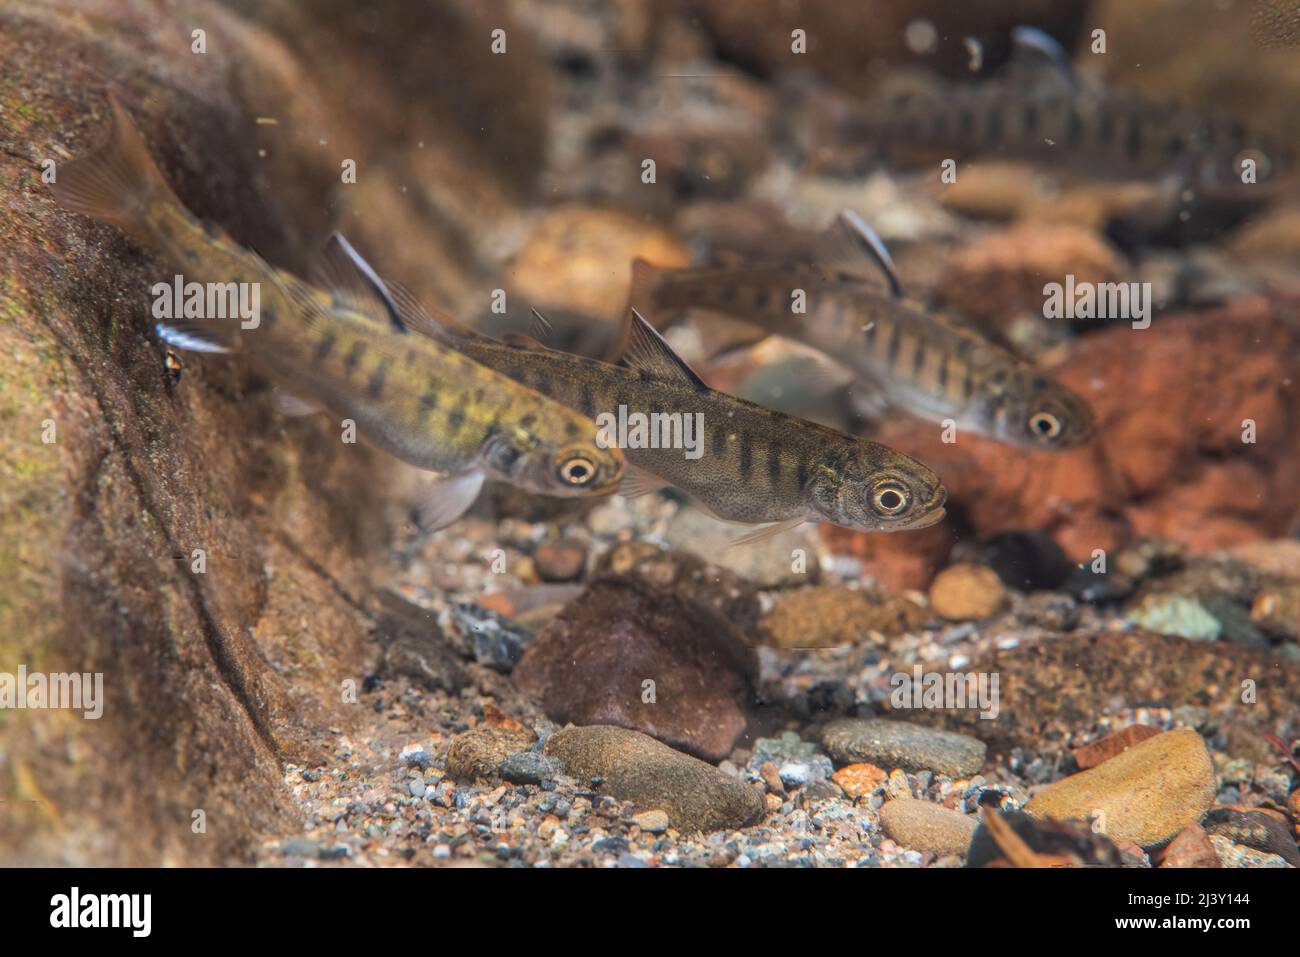 Baby coho salmon fry (Oncorhynchus kisutch), the fish are schooling together in a freshwater stream in Mendocino, California. Stock Photo